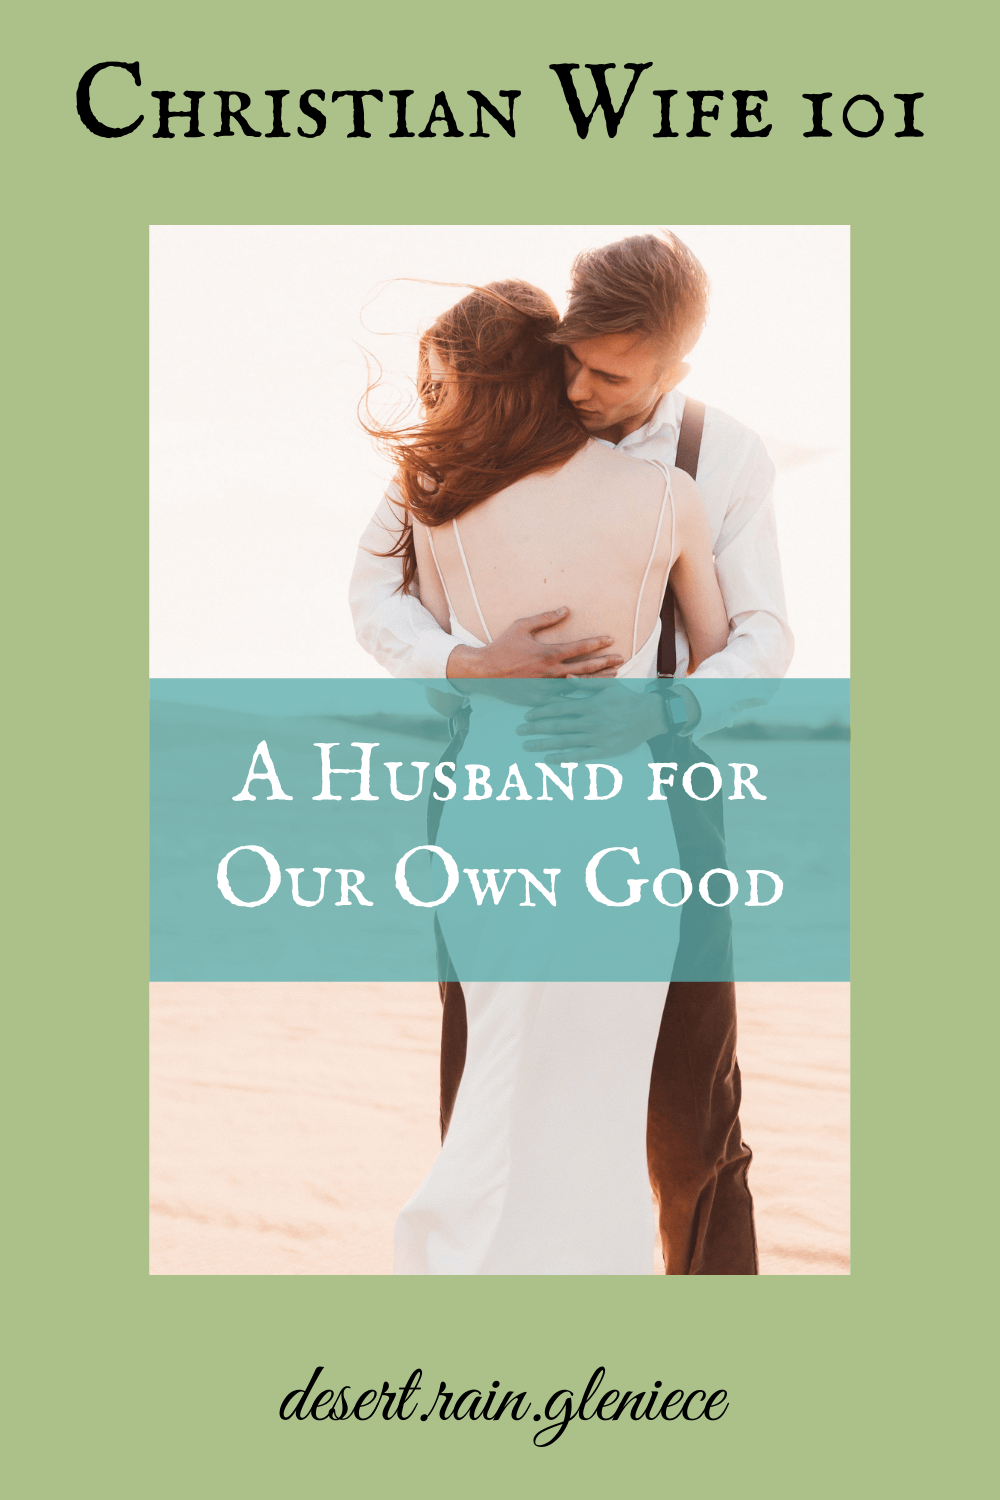 As a starry-eyed bride, your husband's purpose was to fulfill your desires. You had no idea God's purpose for a husband was for your spiritual good. #christianwife101, #godlyhusband, #godlysubmission, #godlywife